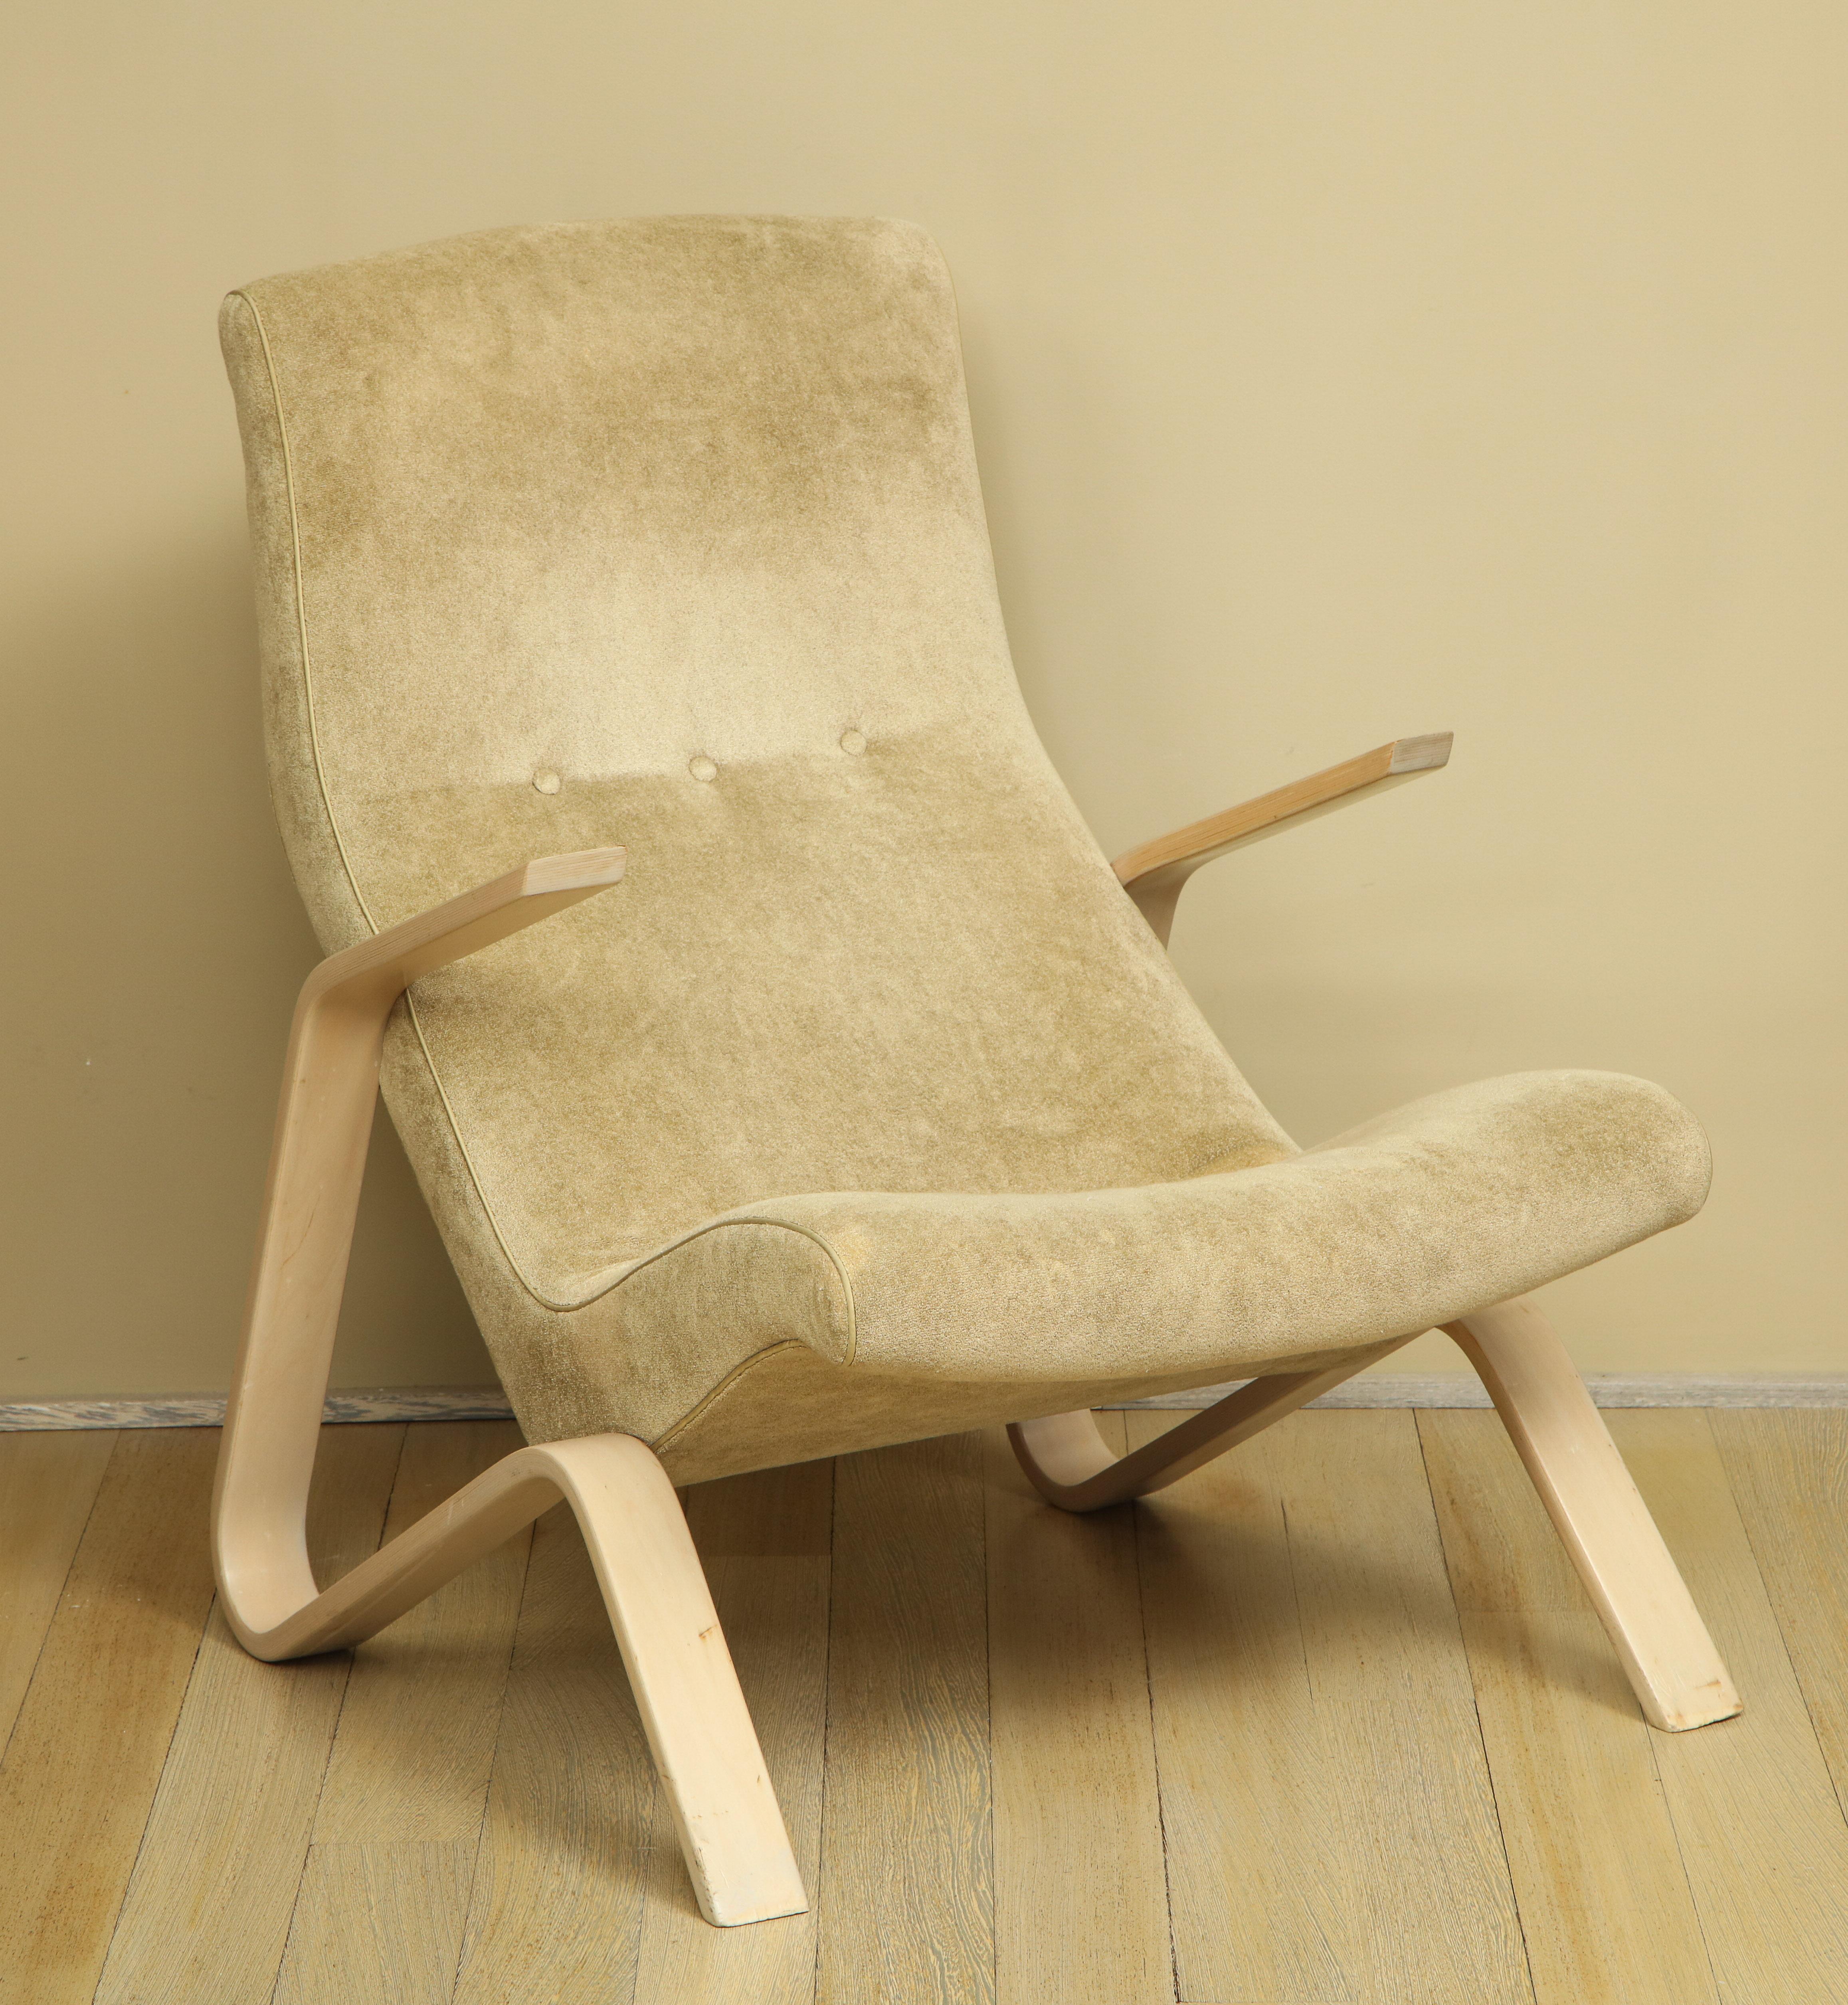 Vintage Grasshopper Armchair by Knoll 4